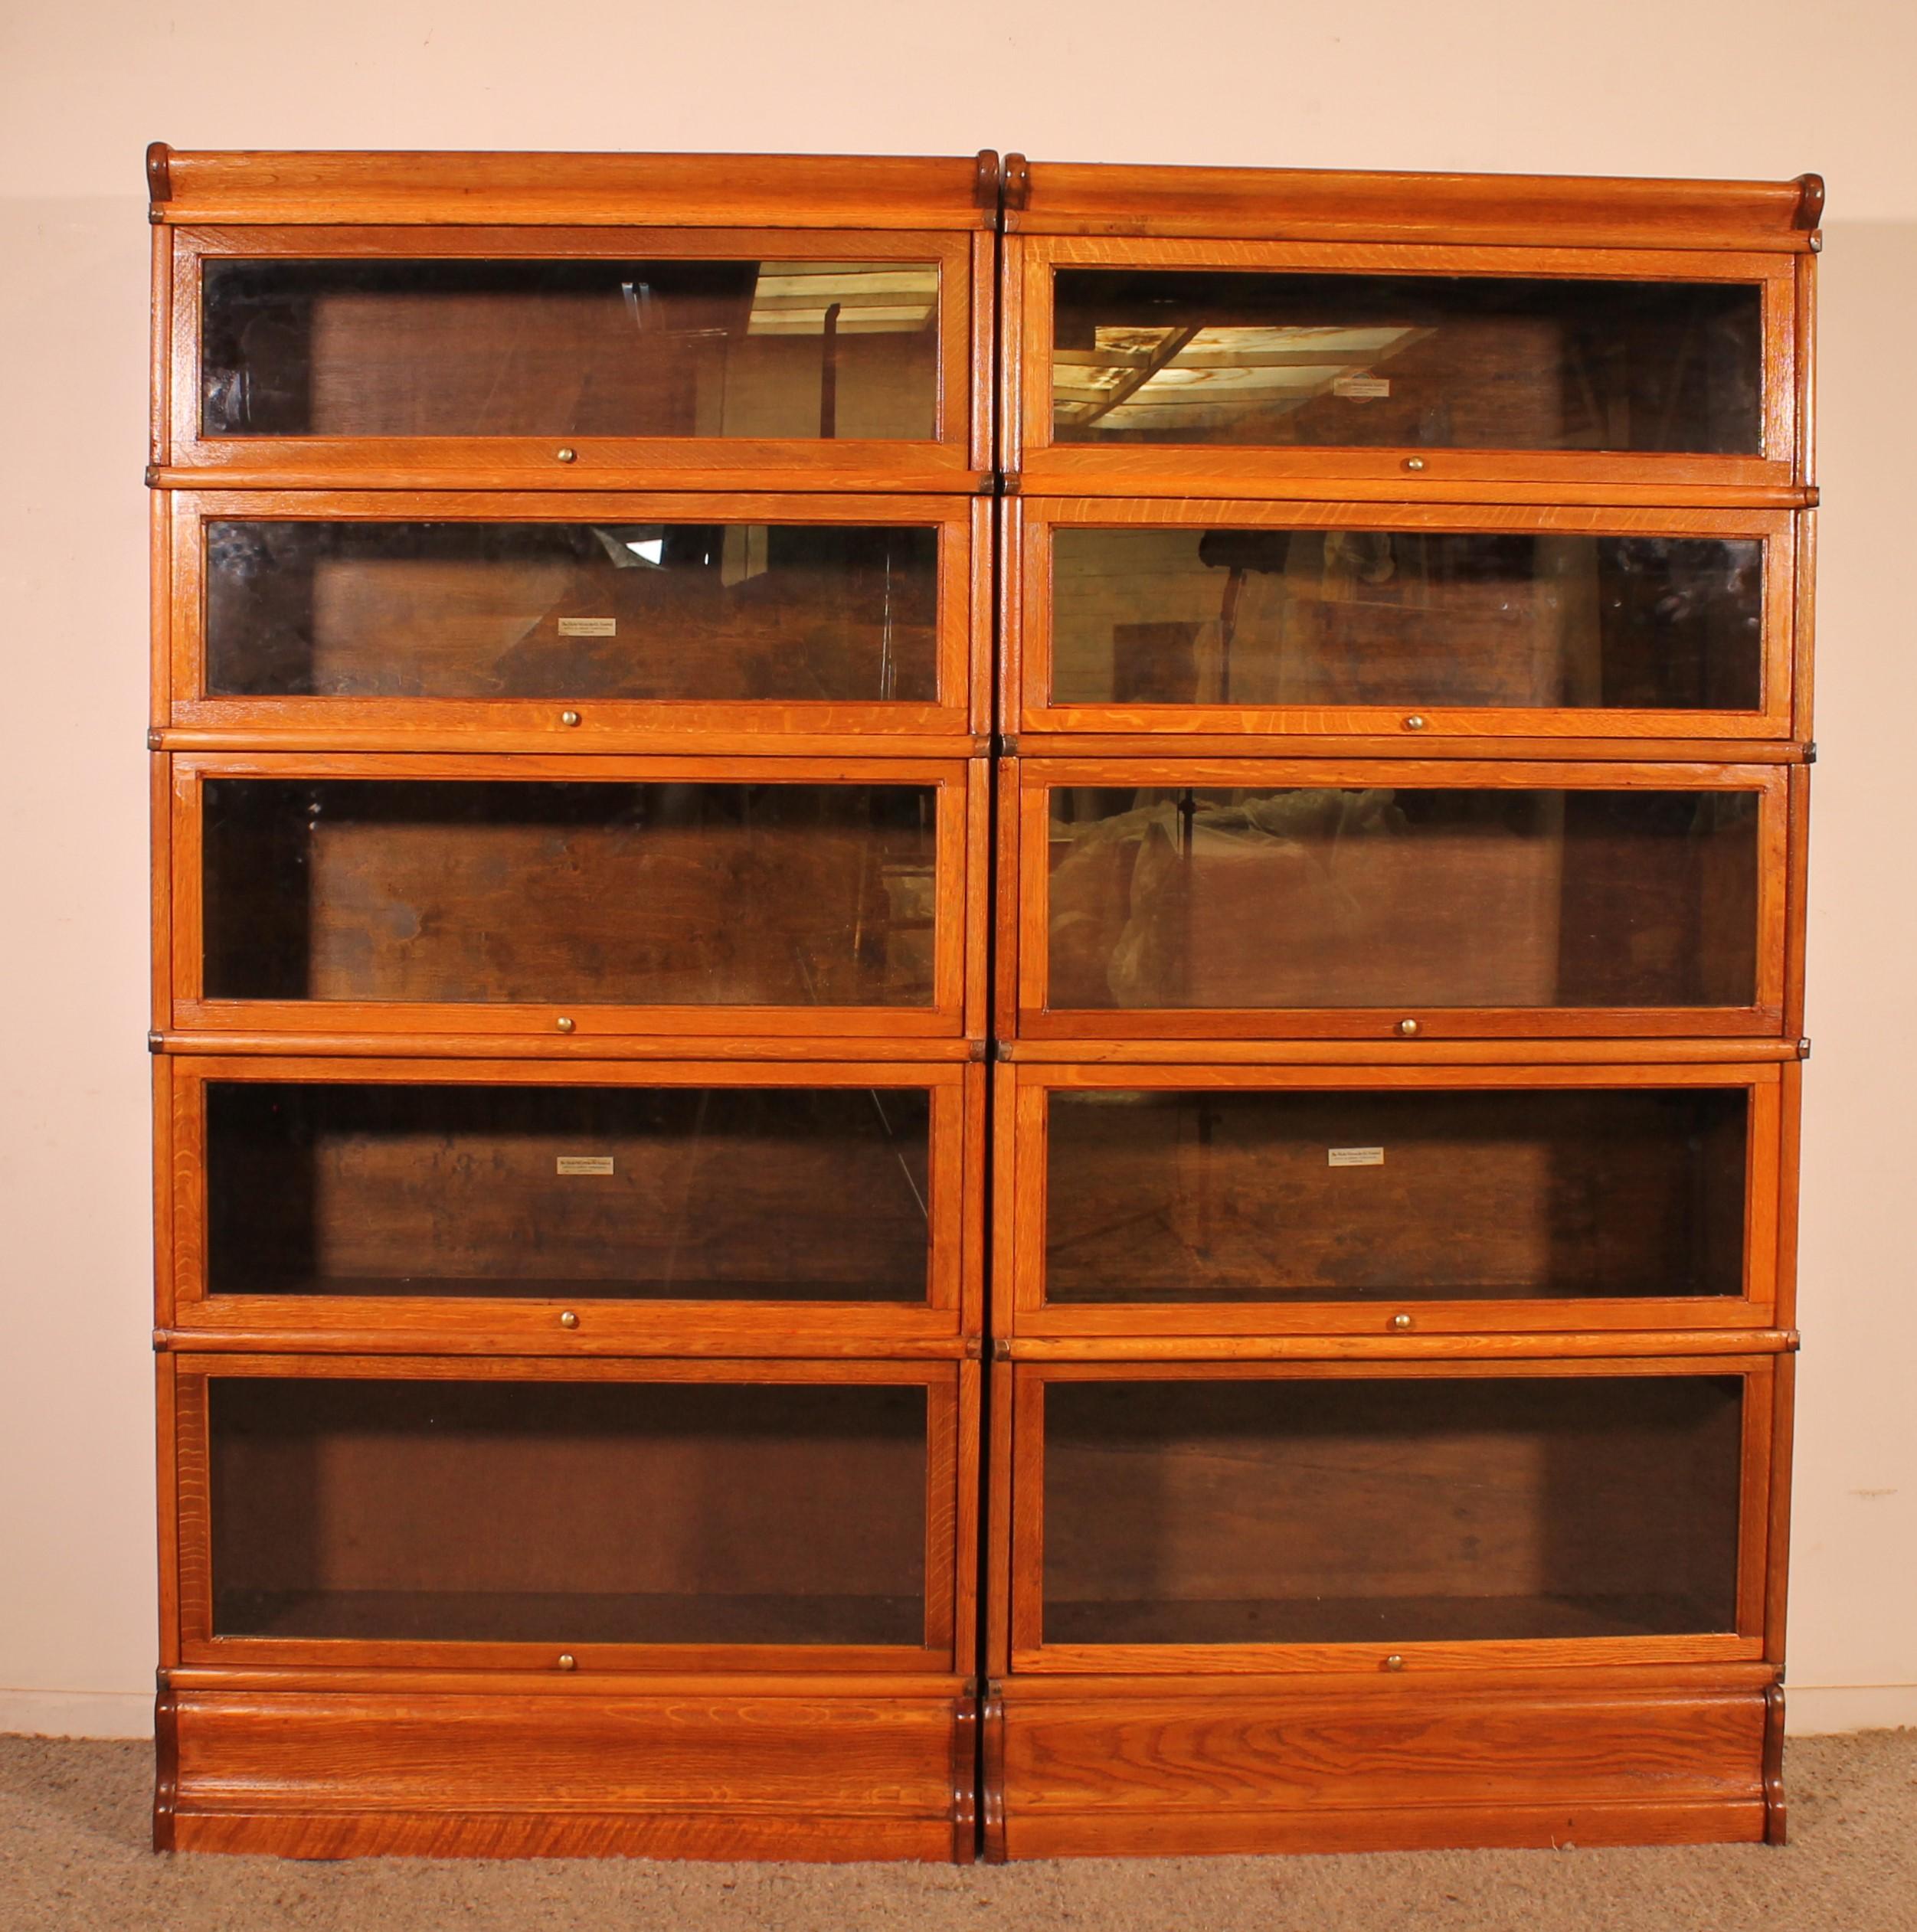 Elegant pair of large Globe Wernicke London bookcases in oak from the end of the 19th century - Early 20th century from England

The two bookcases are made up of 5 elements

The bookcases can be left together and form a large bookcase or